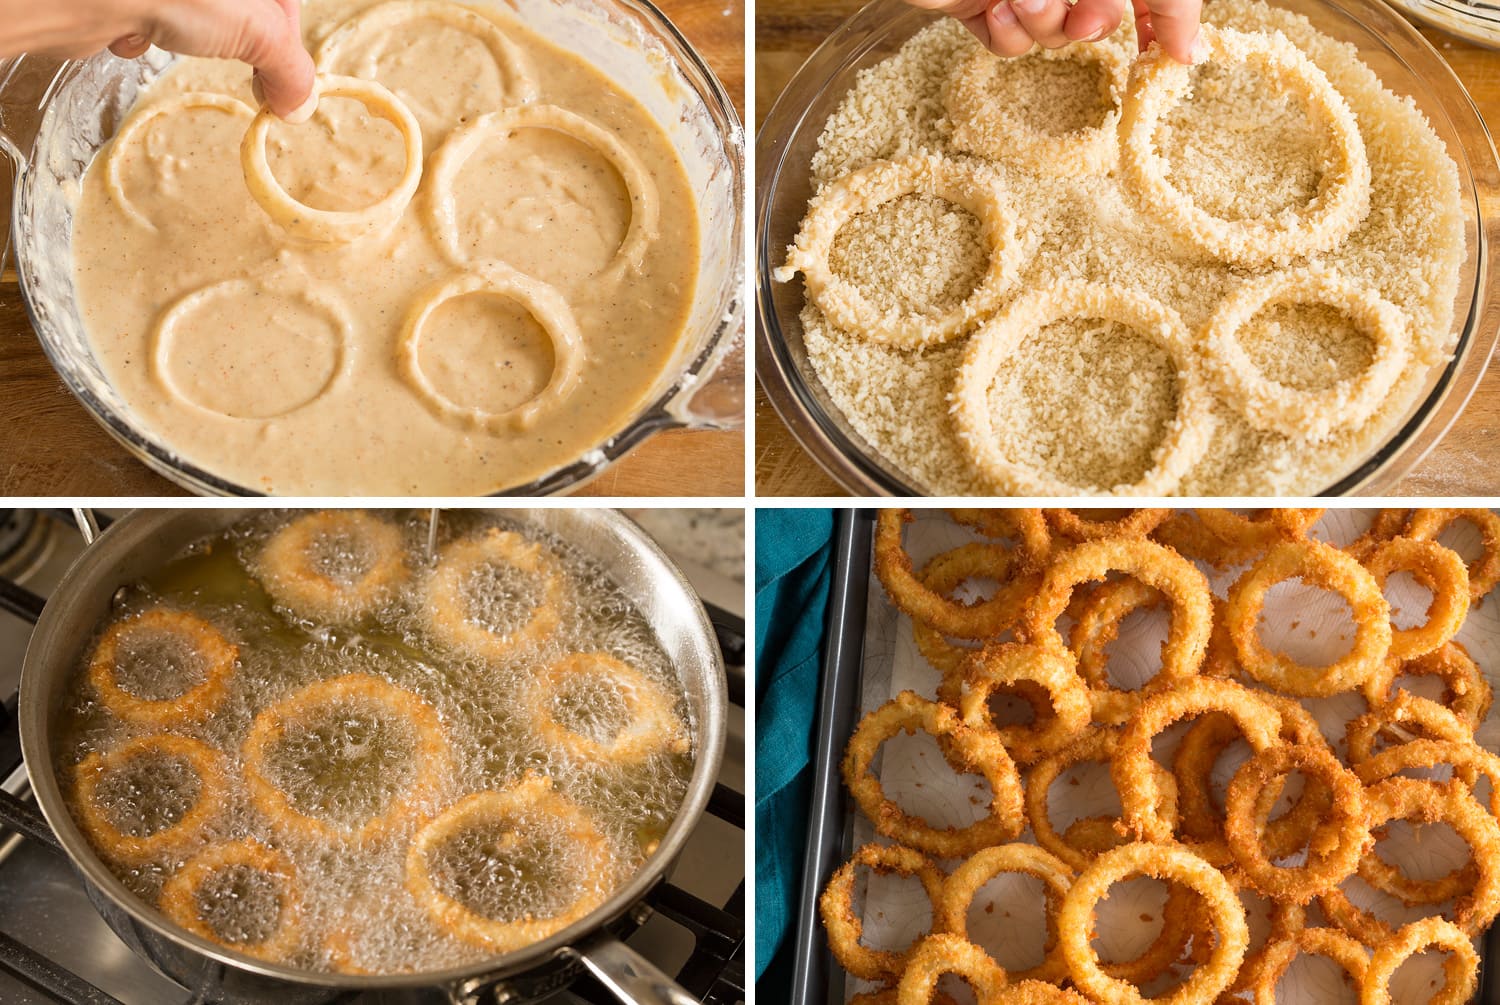 Collage of photos showing how to bread and deep fry onion rings in oil.